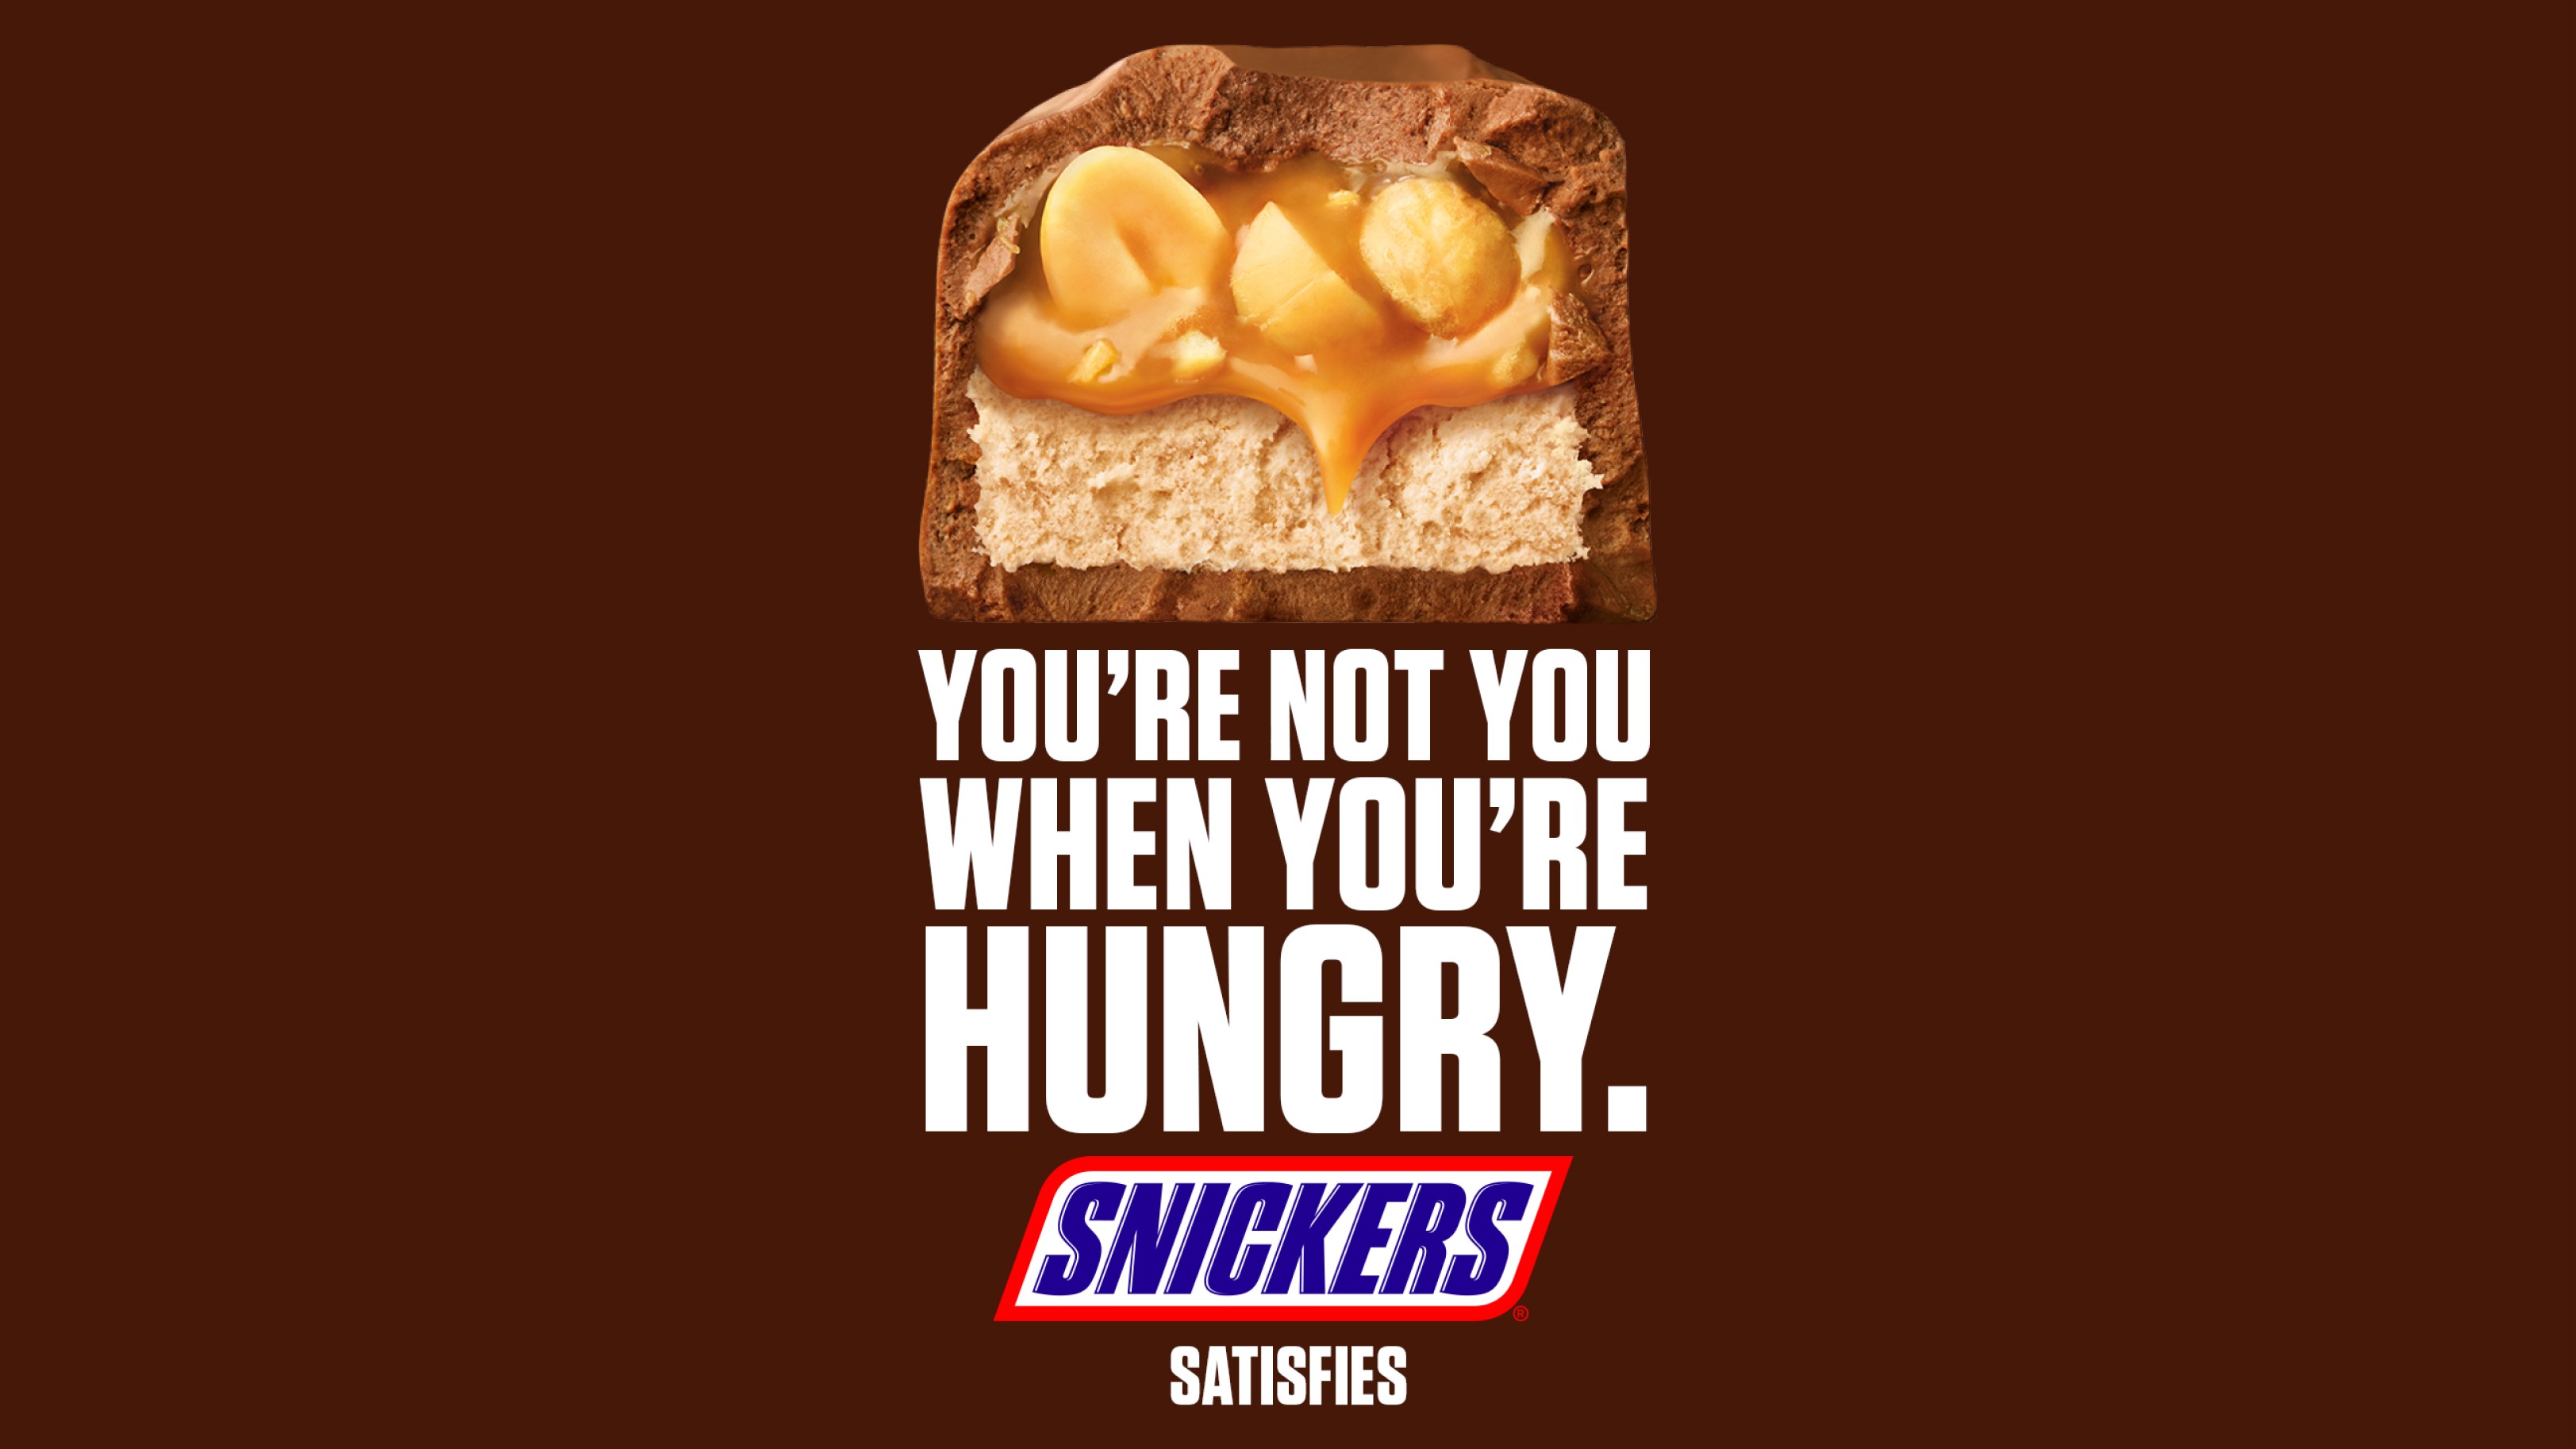 Snickers promo image